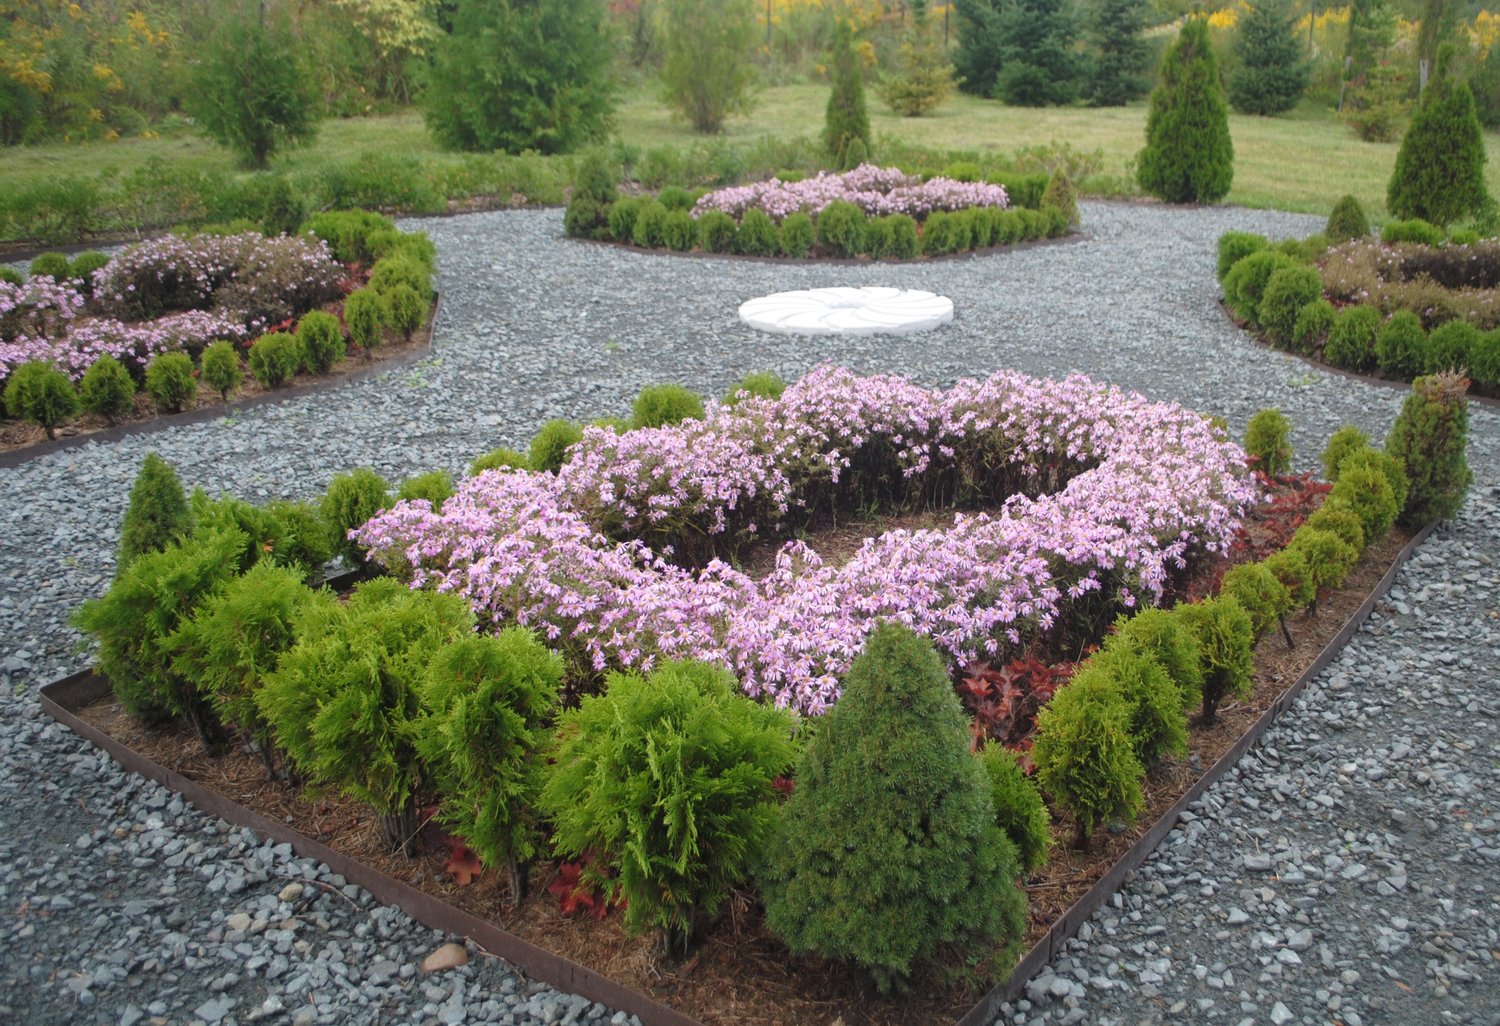 A parterre at Flying Trillium uses spruce, arborvitae, asters, heuchera and other native plants.